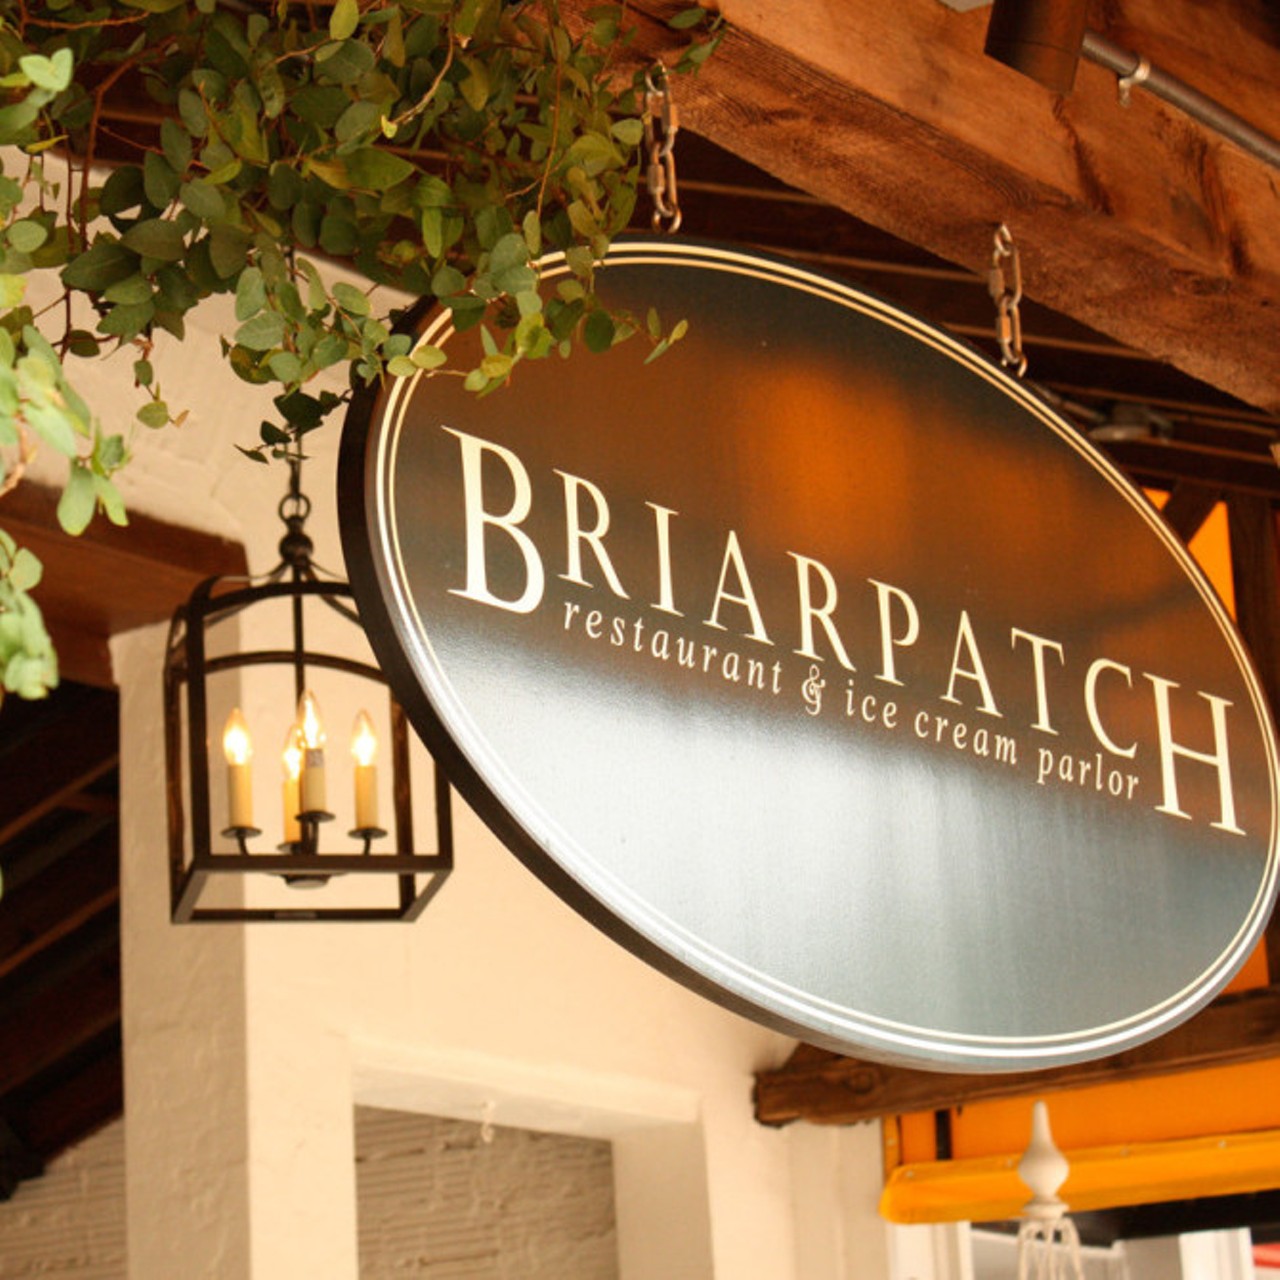 Briarpatch 
252 N. Park Ave., Winter Park, FL 32789, 407-628-8651
Since 1980, Briarpatch has welcomed guests to their restaurant. They are known for their contemporary American cuisine and for cooking with the freshest local ingredients.
Photo via Briarpatch